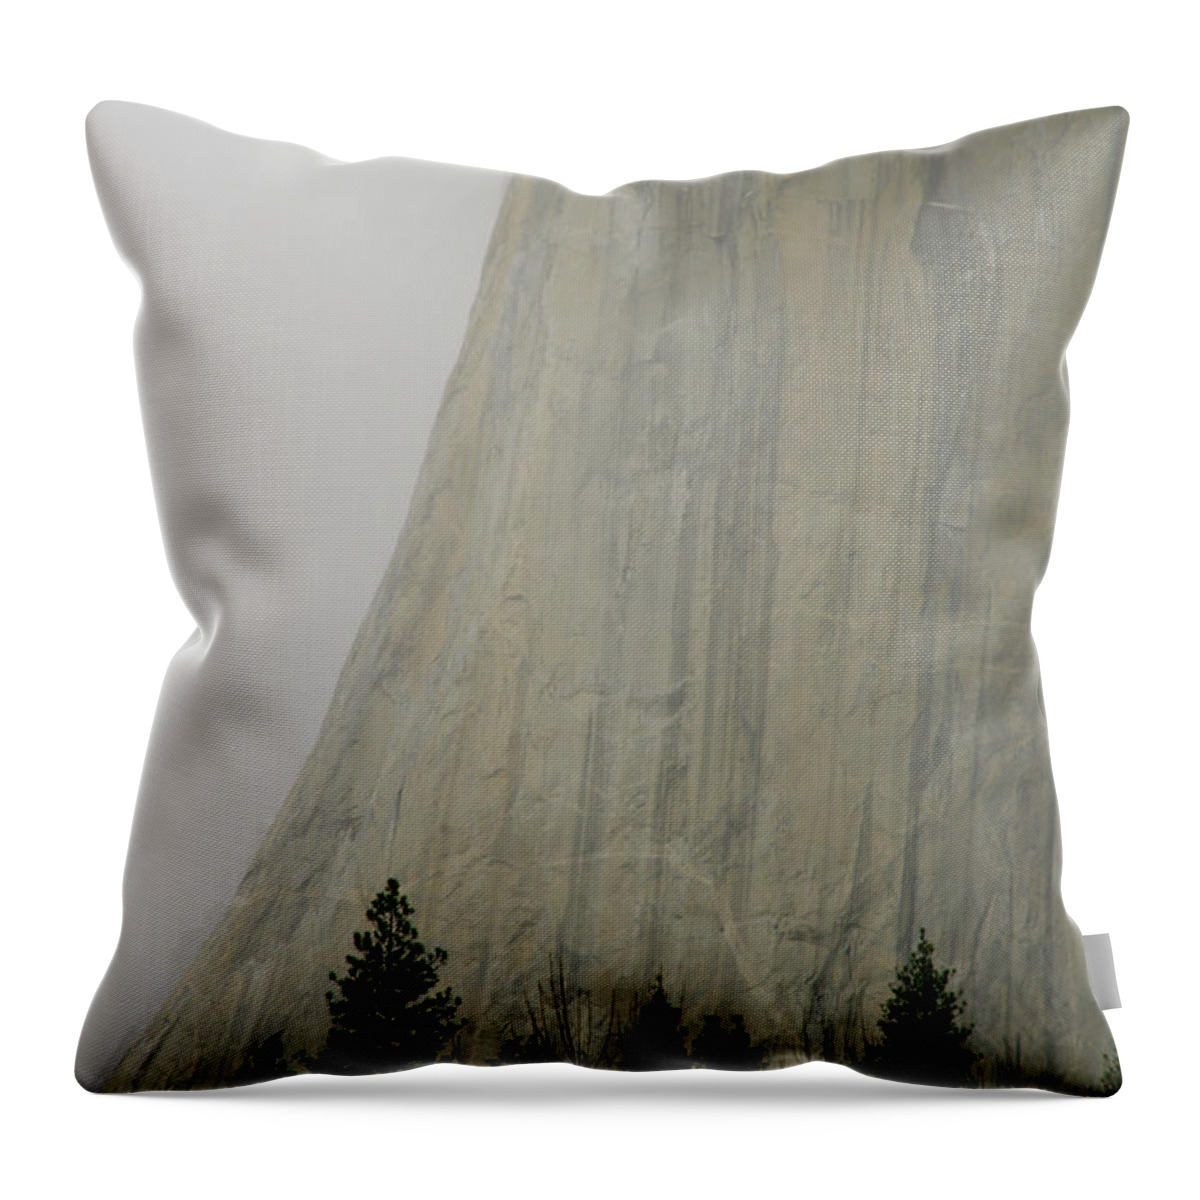 Scenics Throw Pillow featuring the photograph El Capitan, Yosemite National Park by André Leopold